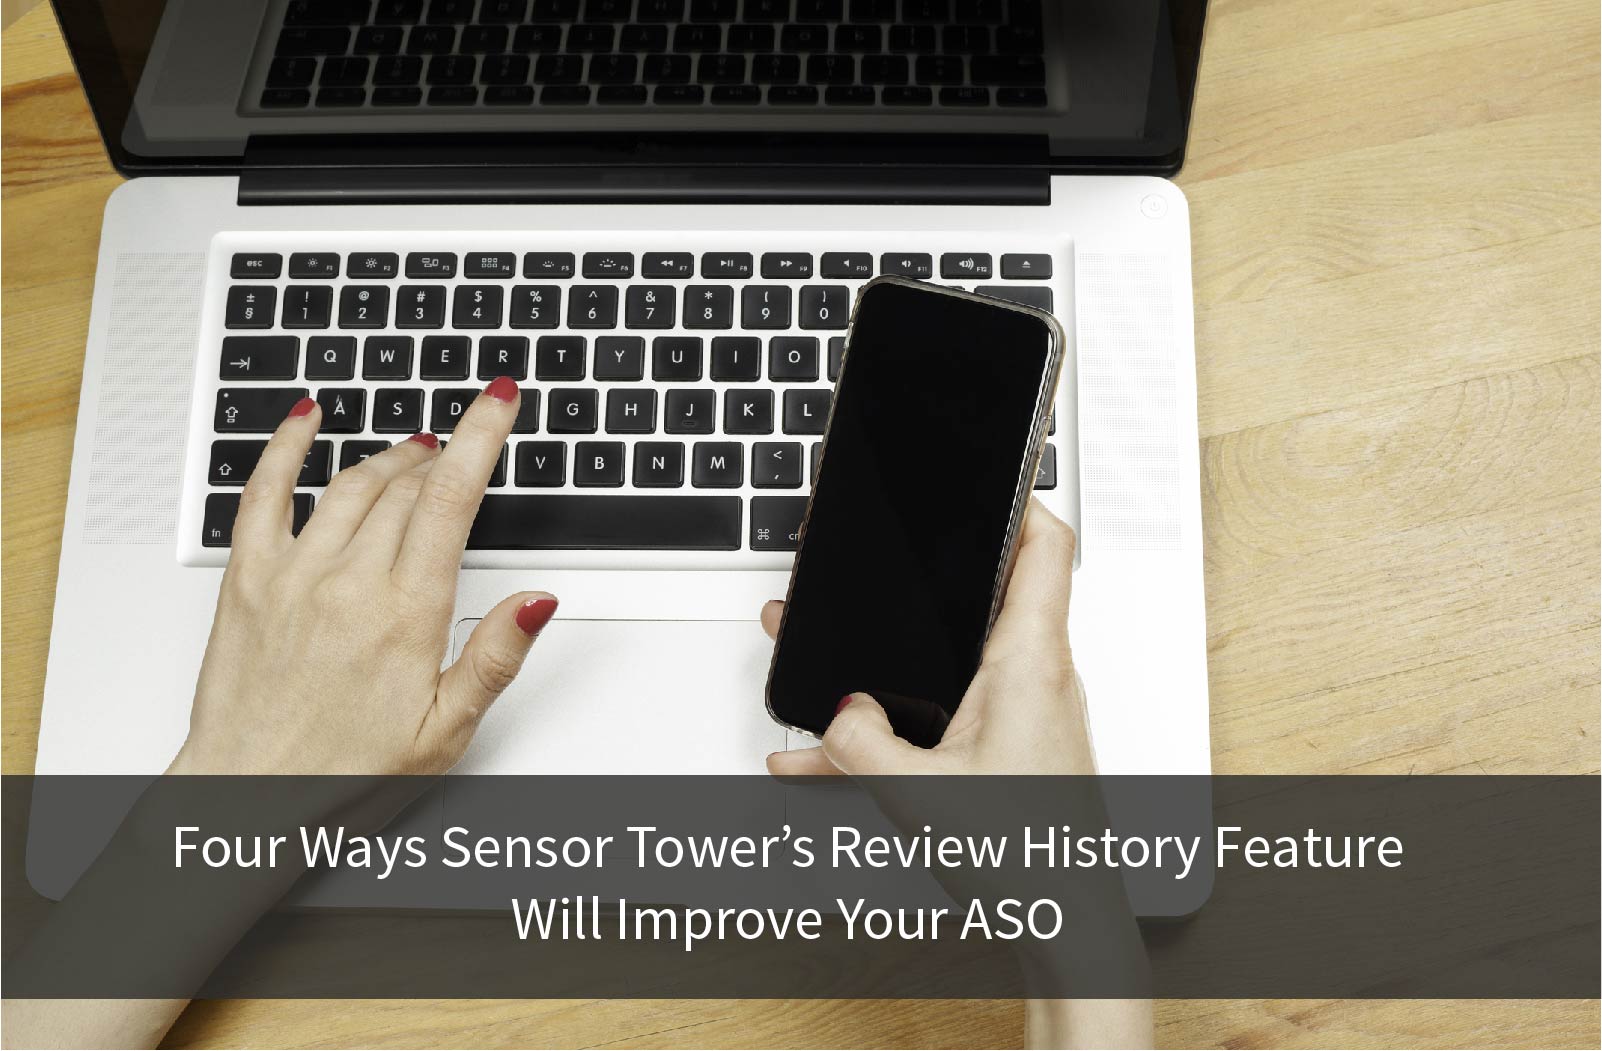 lt="Four Ways Sensor Tower's Review History Feature Will Improve Your ASO